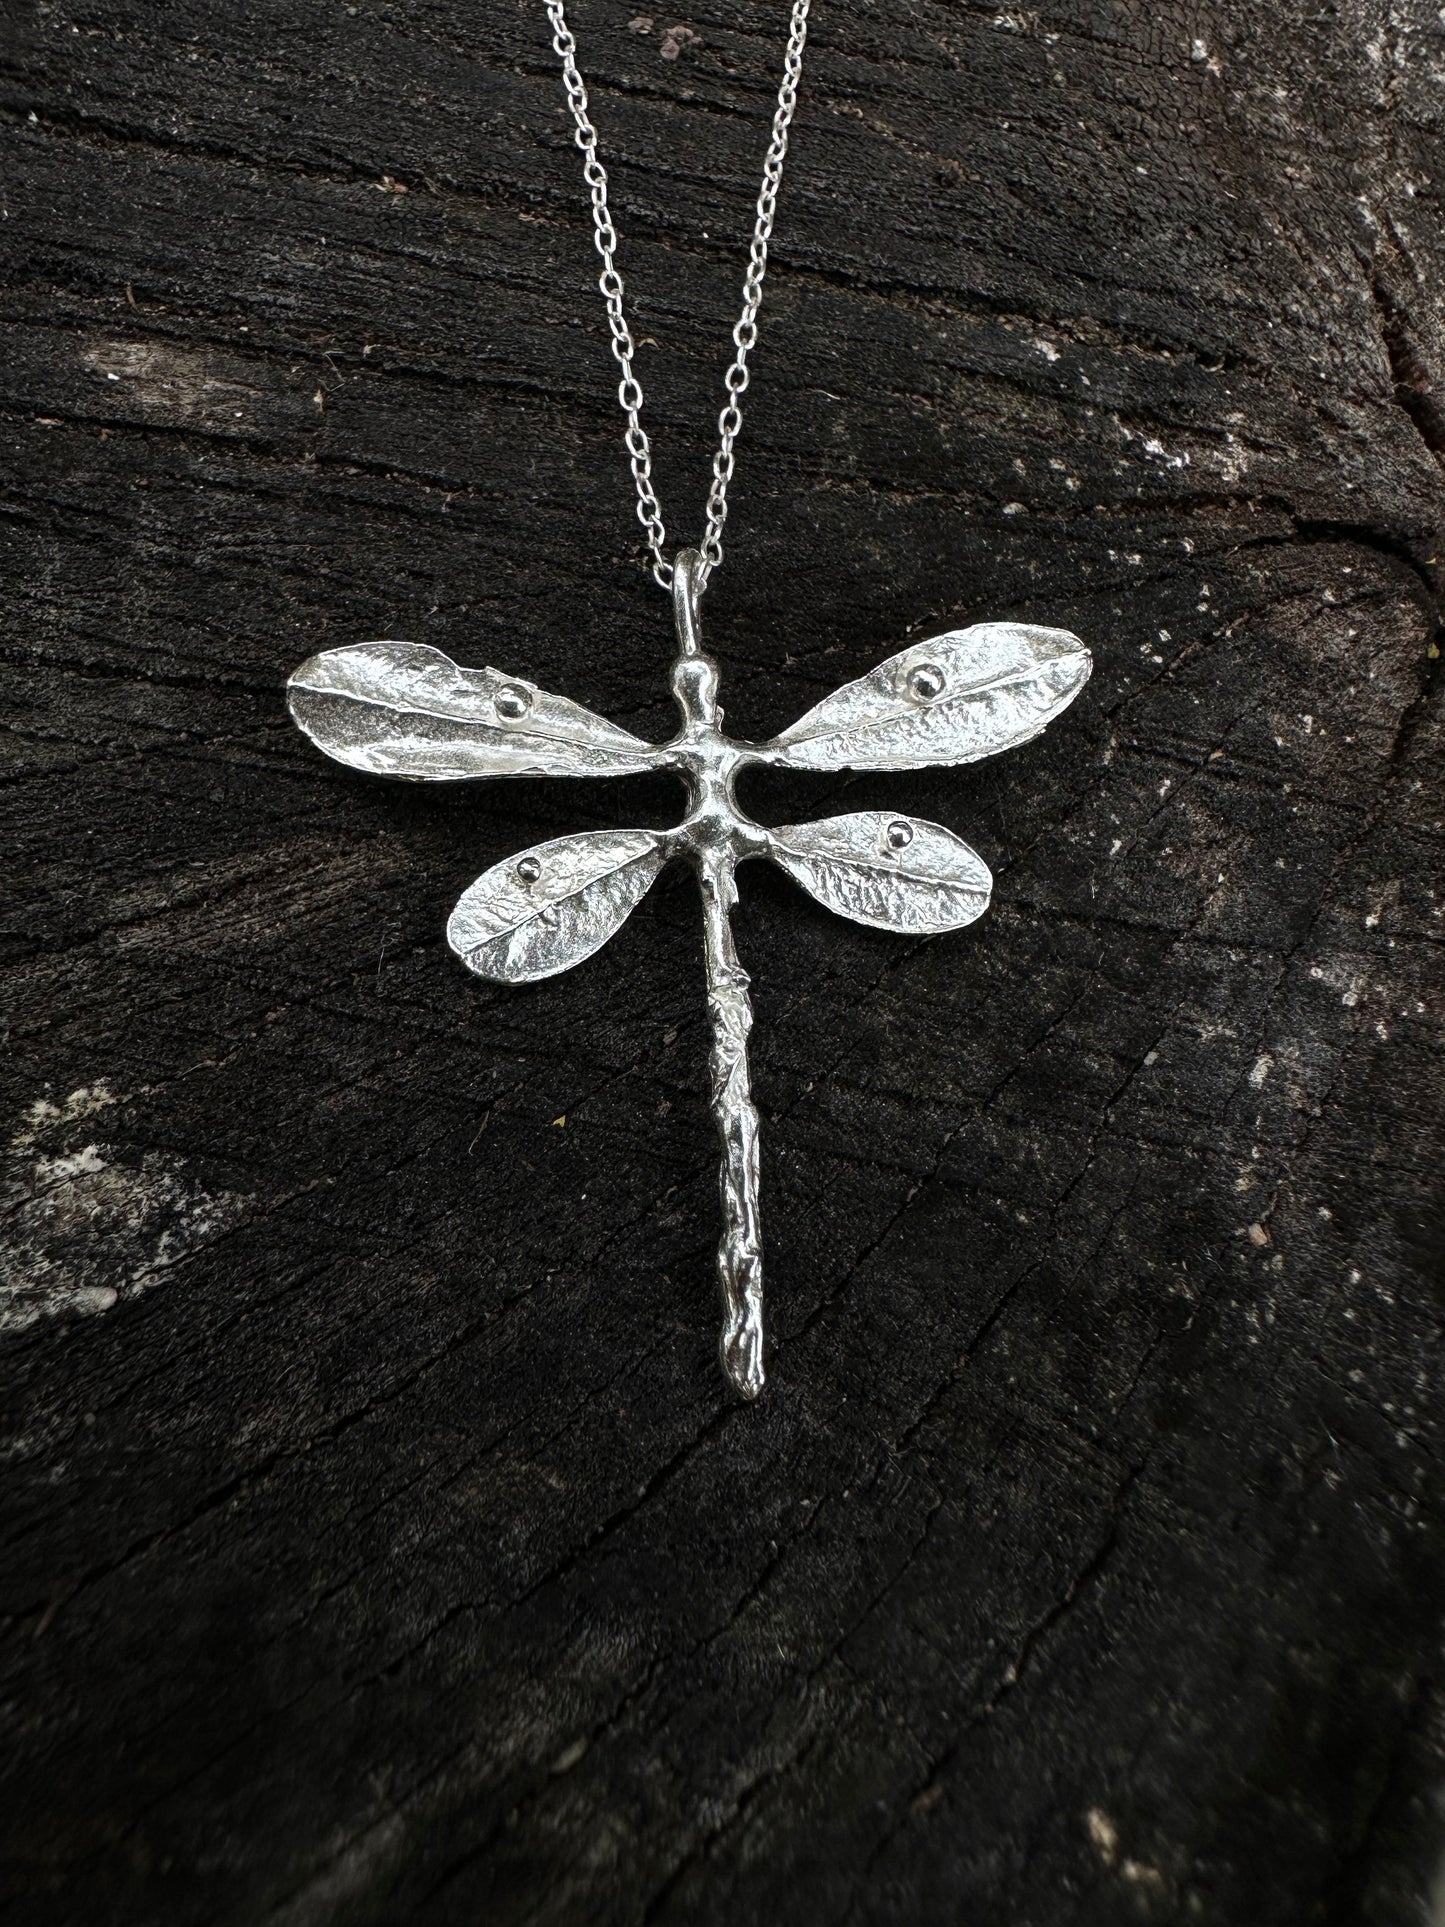 DRAGONFLY NECKLACE | Adjustable to 16", 18", or 20"